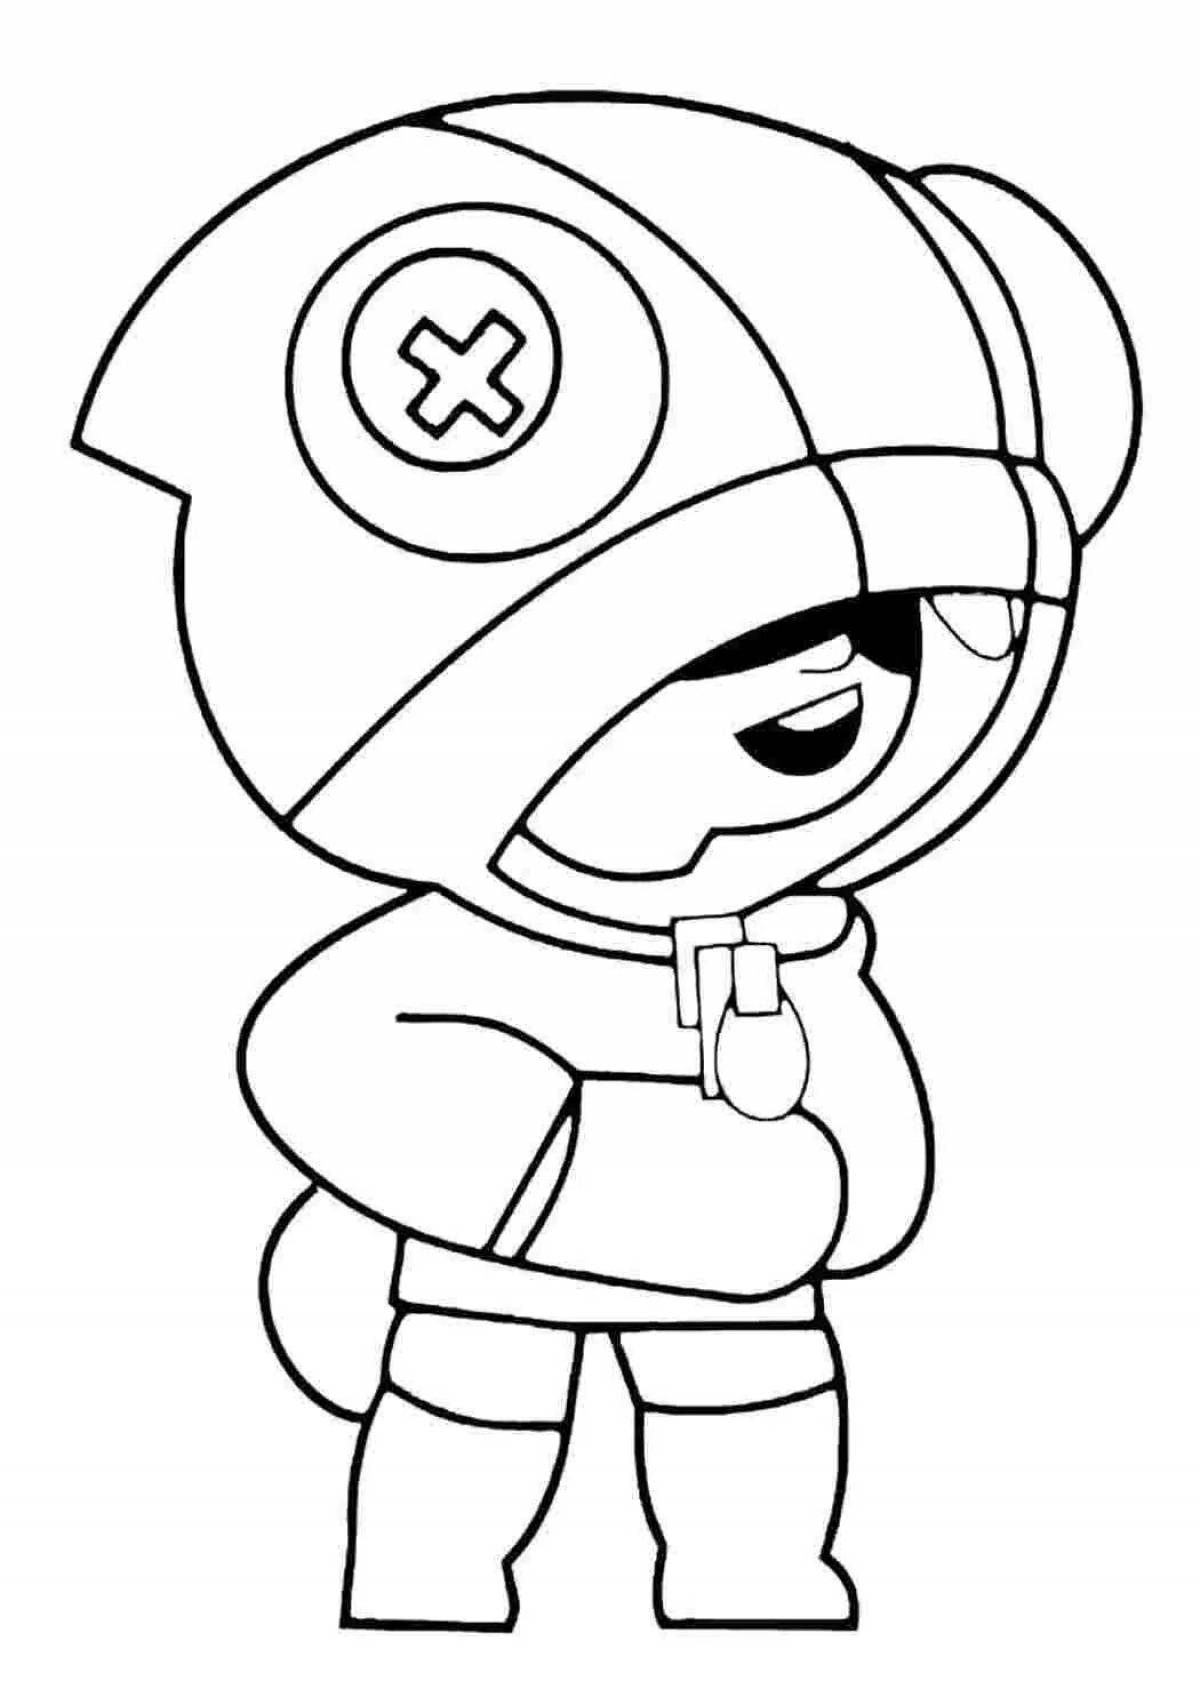 Greatly colored blawer stars coloring page